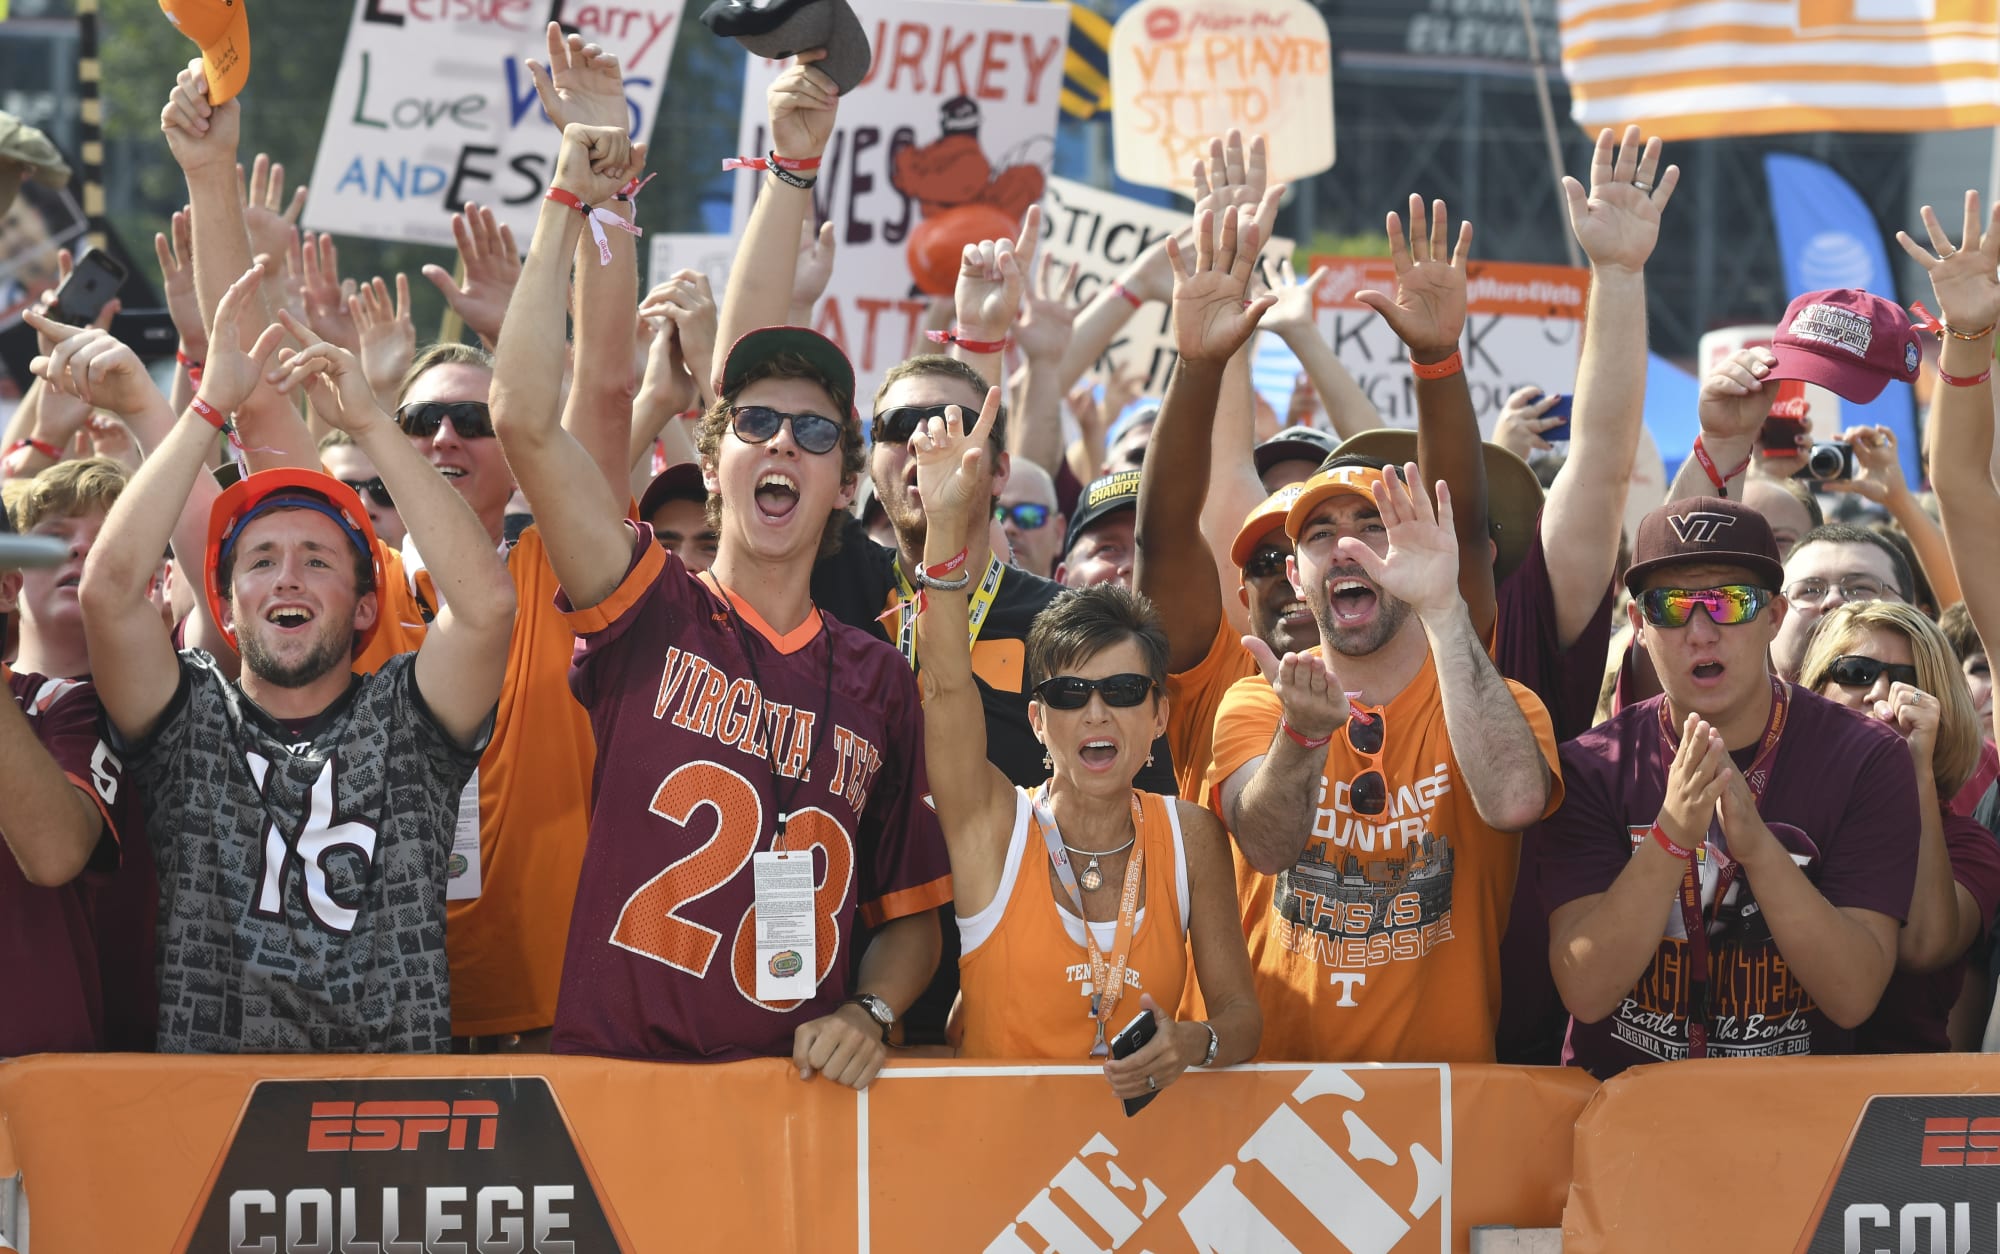 Top 5 moments from 'College GameDay' at Clemson football